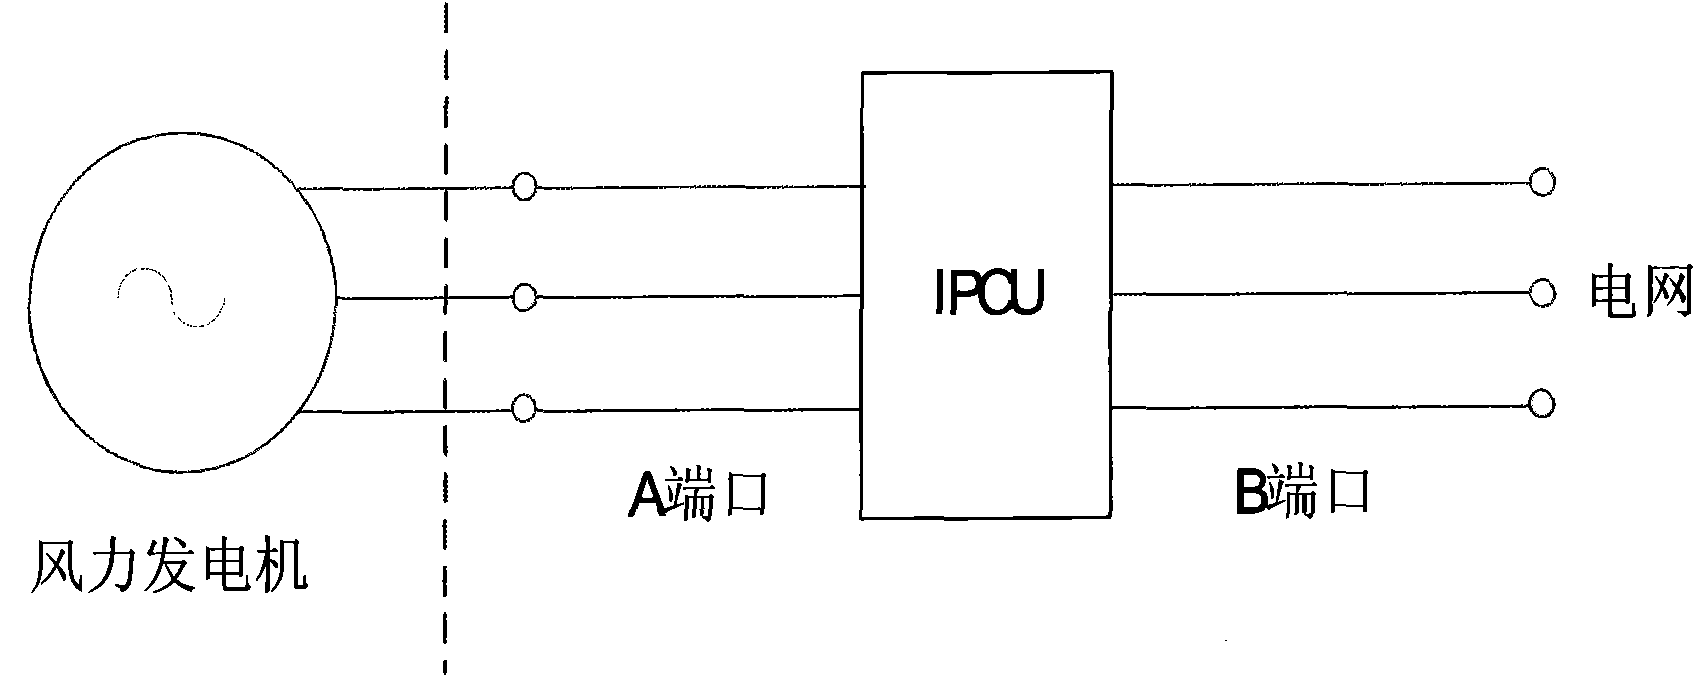 Intelligent power control unit for low voltage ride through and application thereof